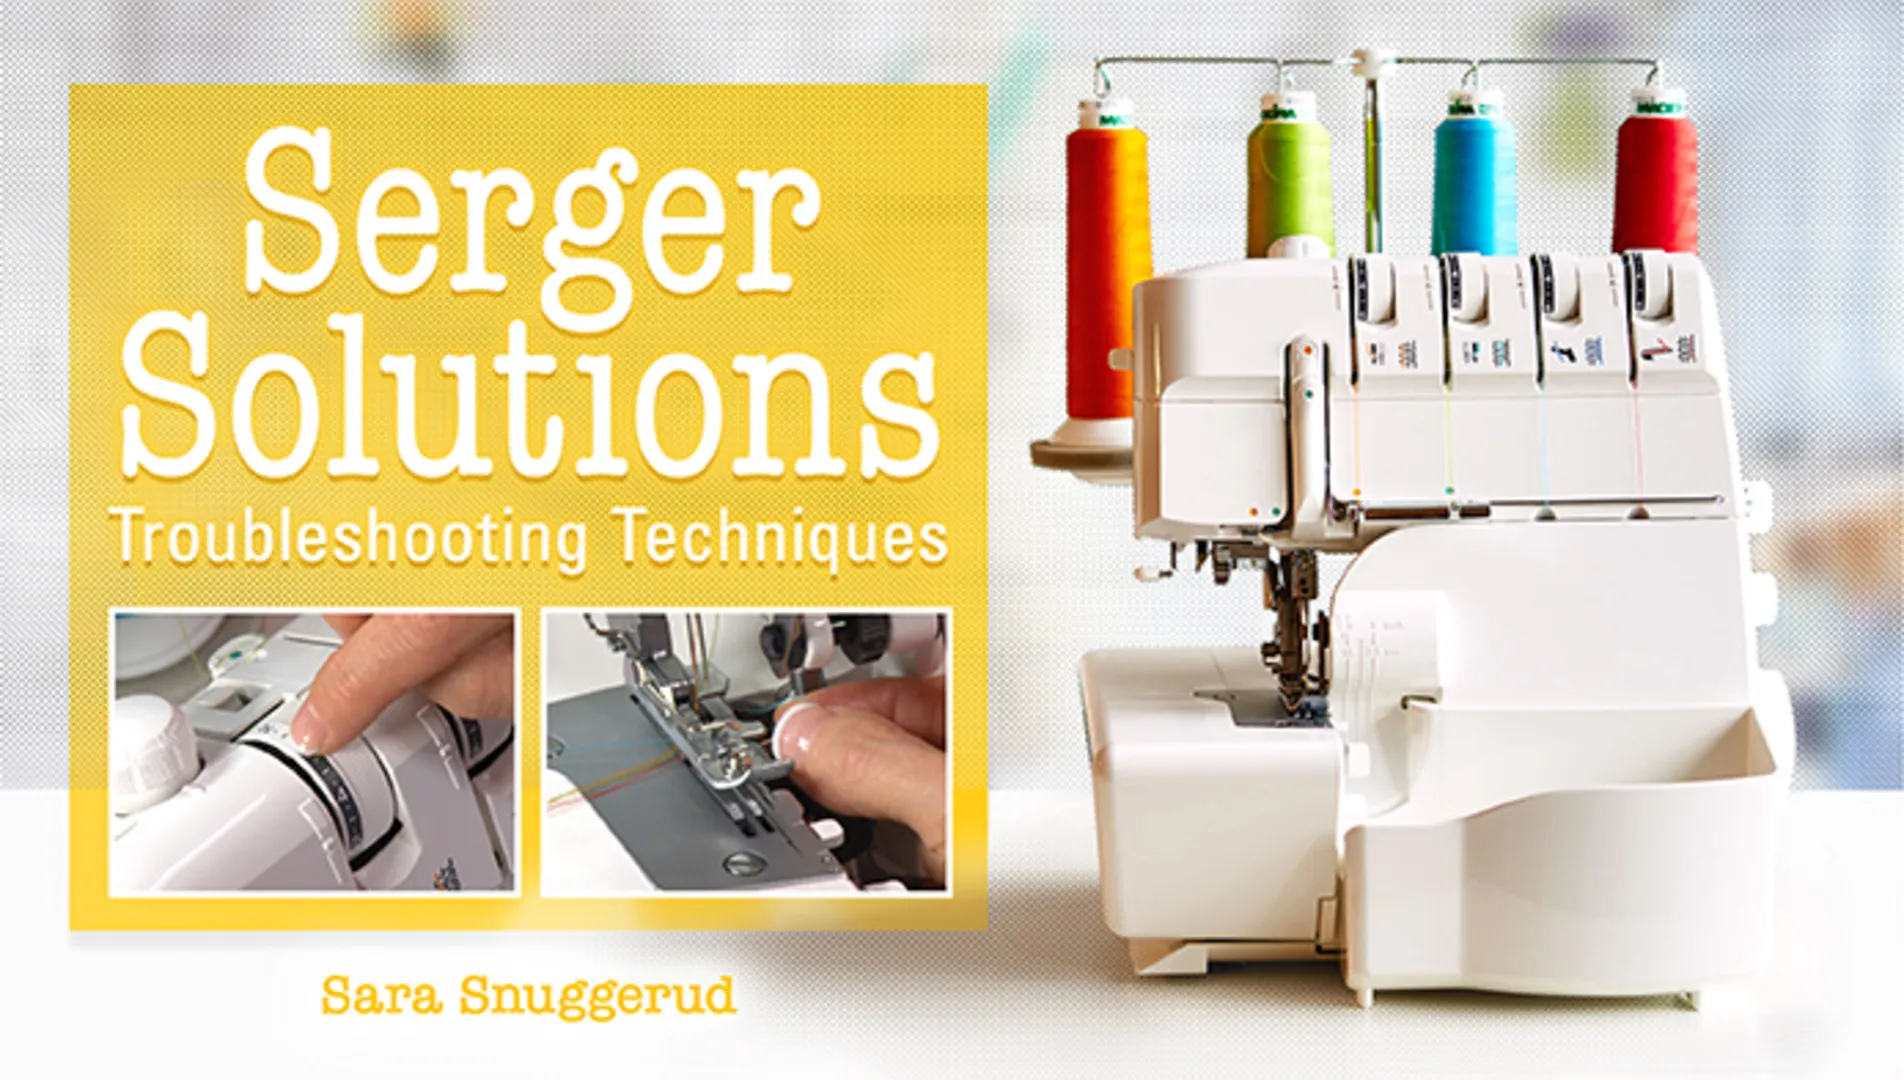 Serger Solutions: Troubleshooting Techniques